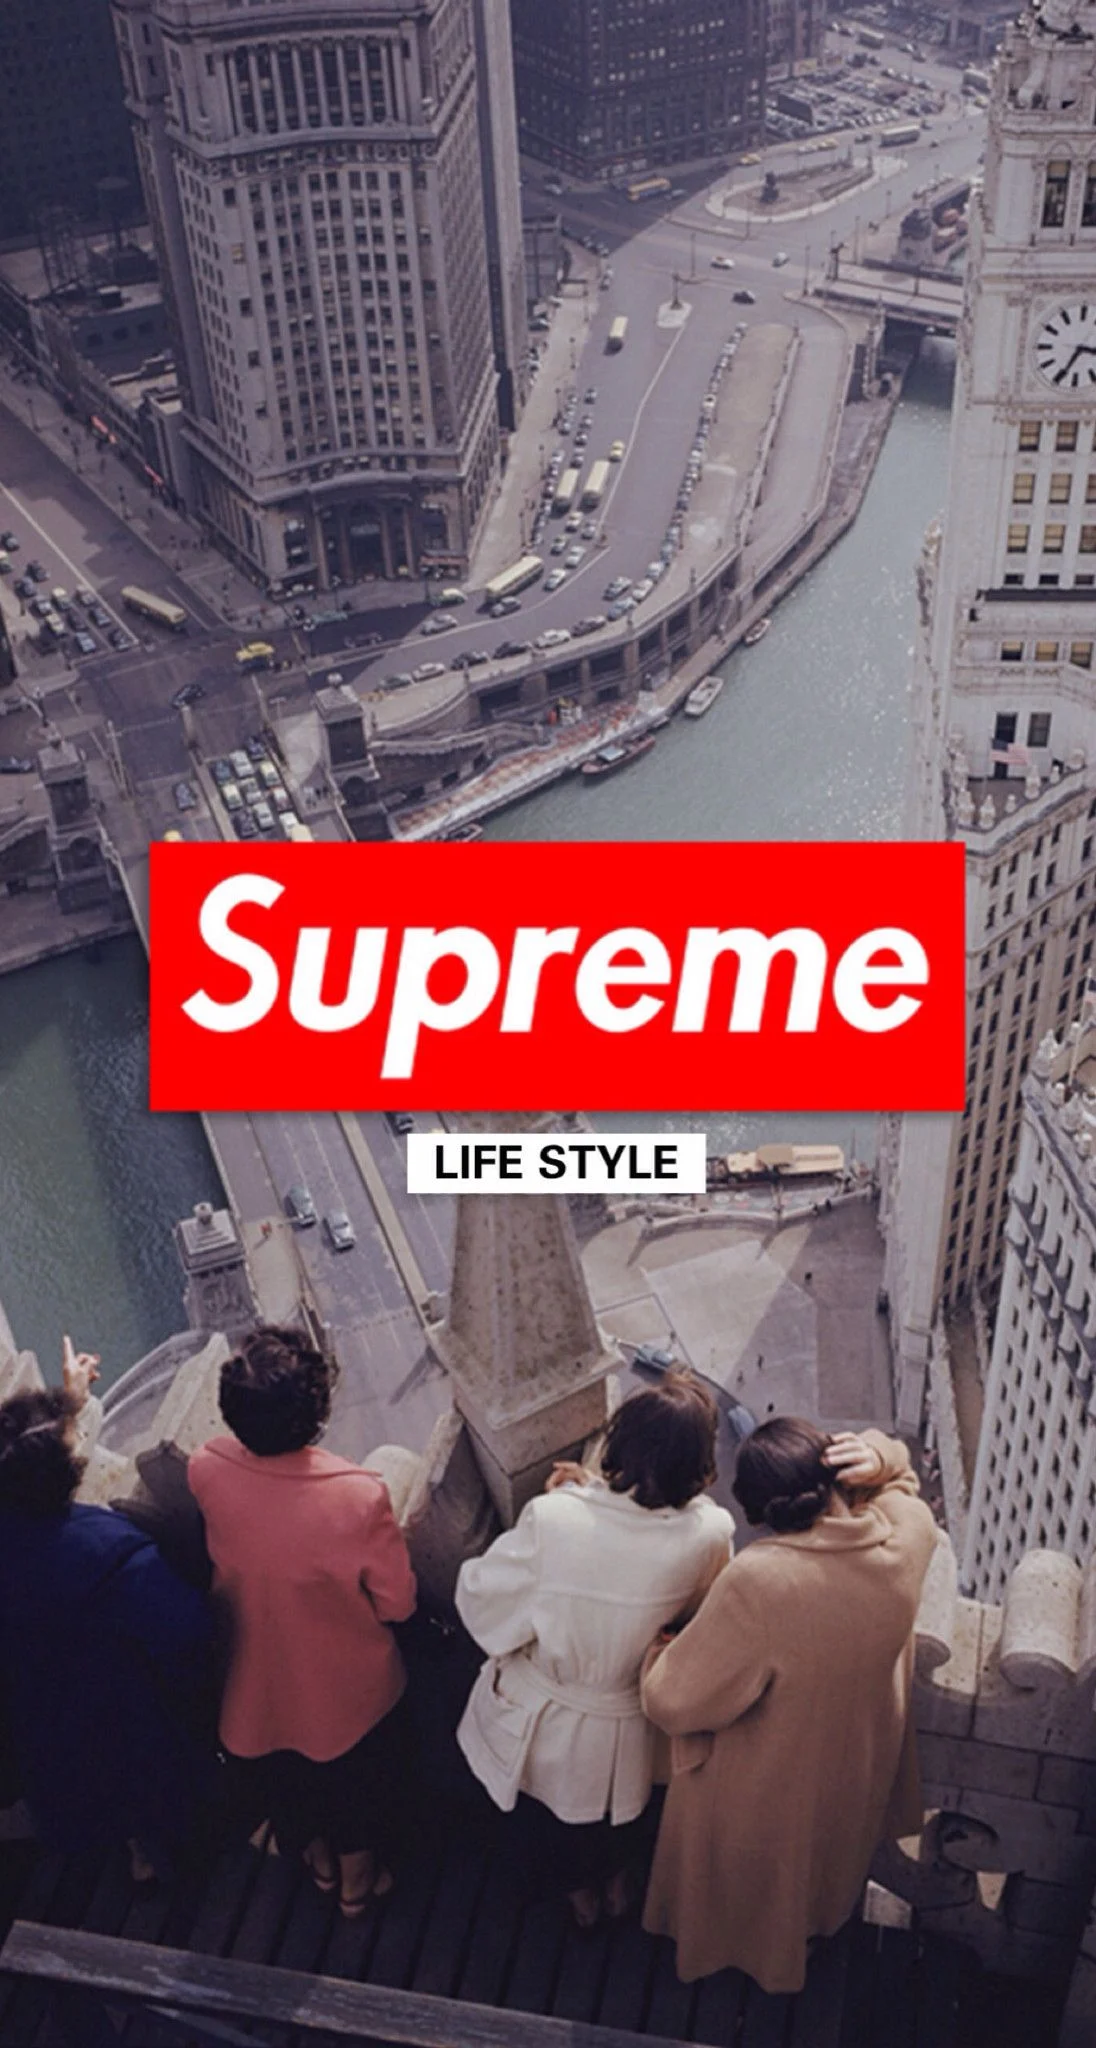 Dope Supreme Wallpapers   Top Free Dope Supreme Backgrounds